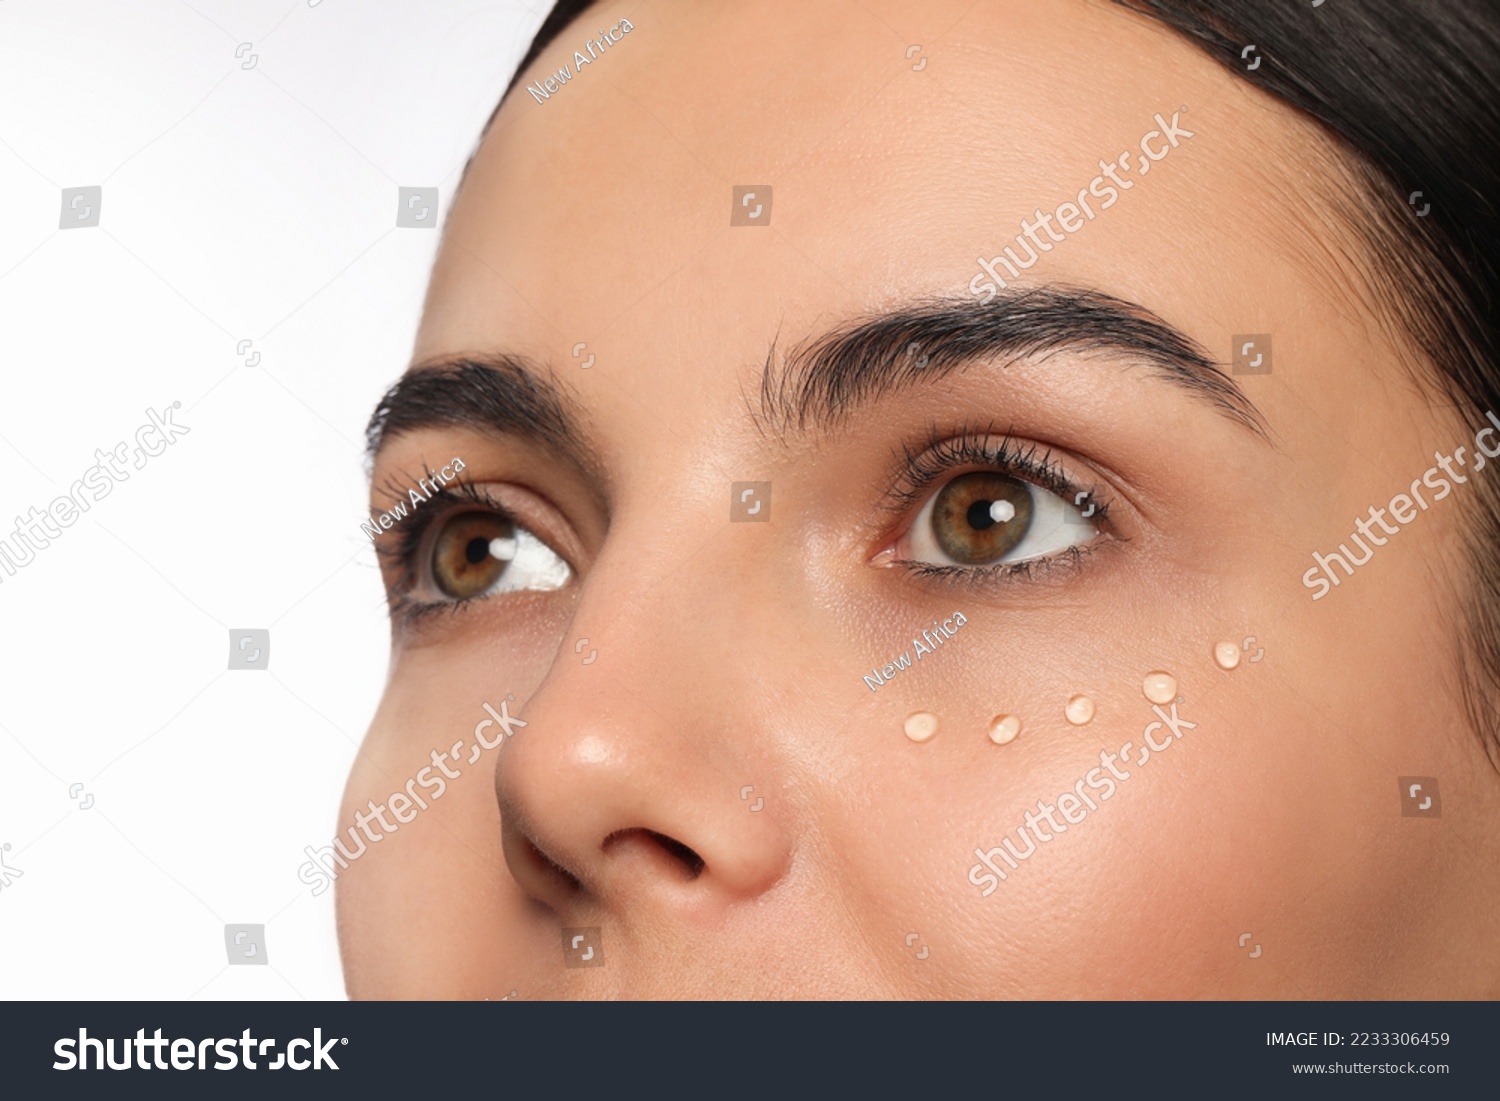 Closeup view of young woman with gel on skin under eye against white background #2233306459